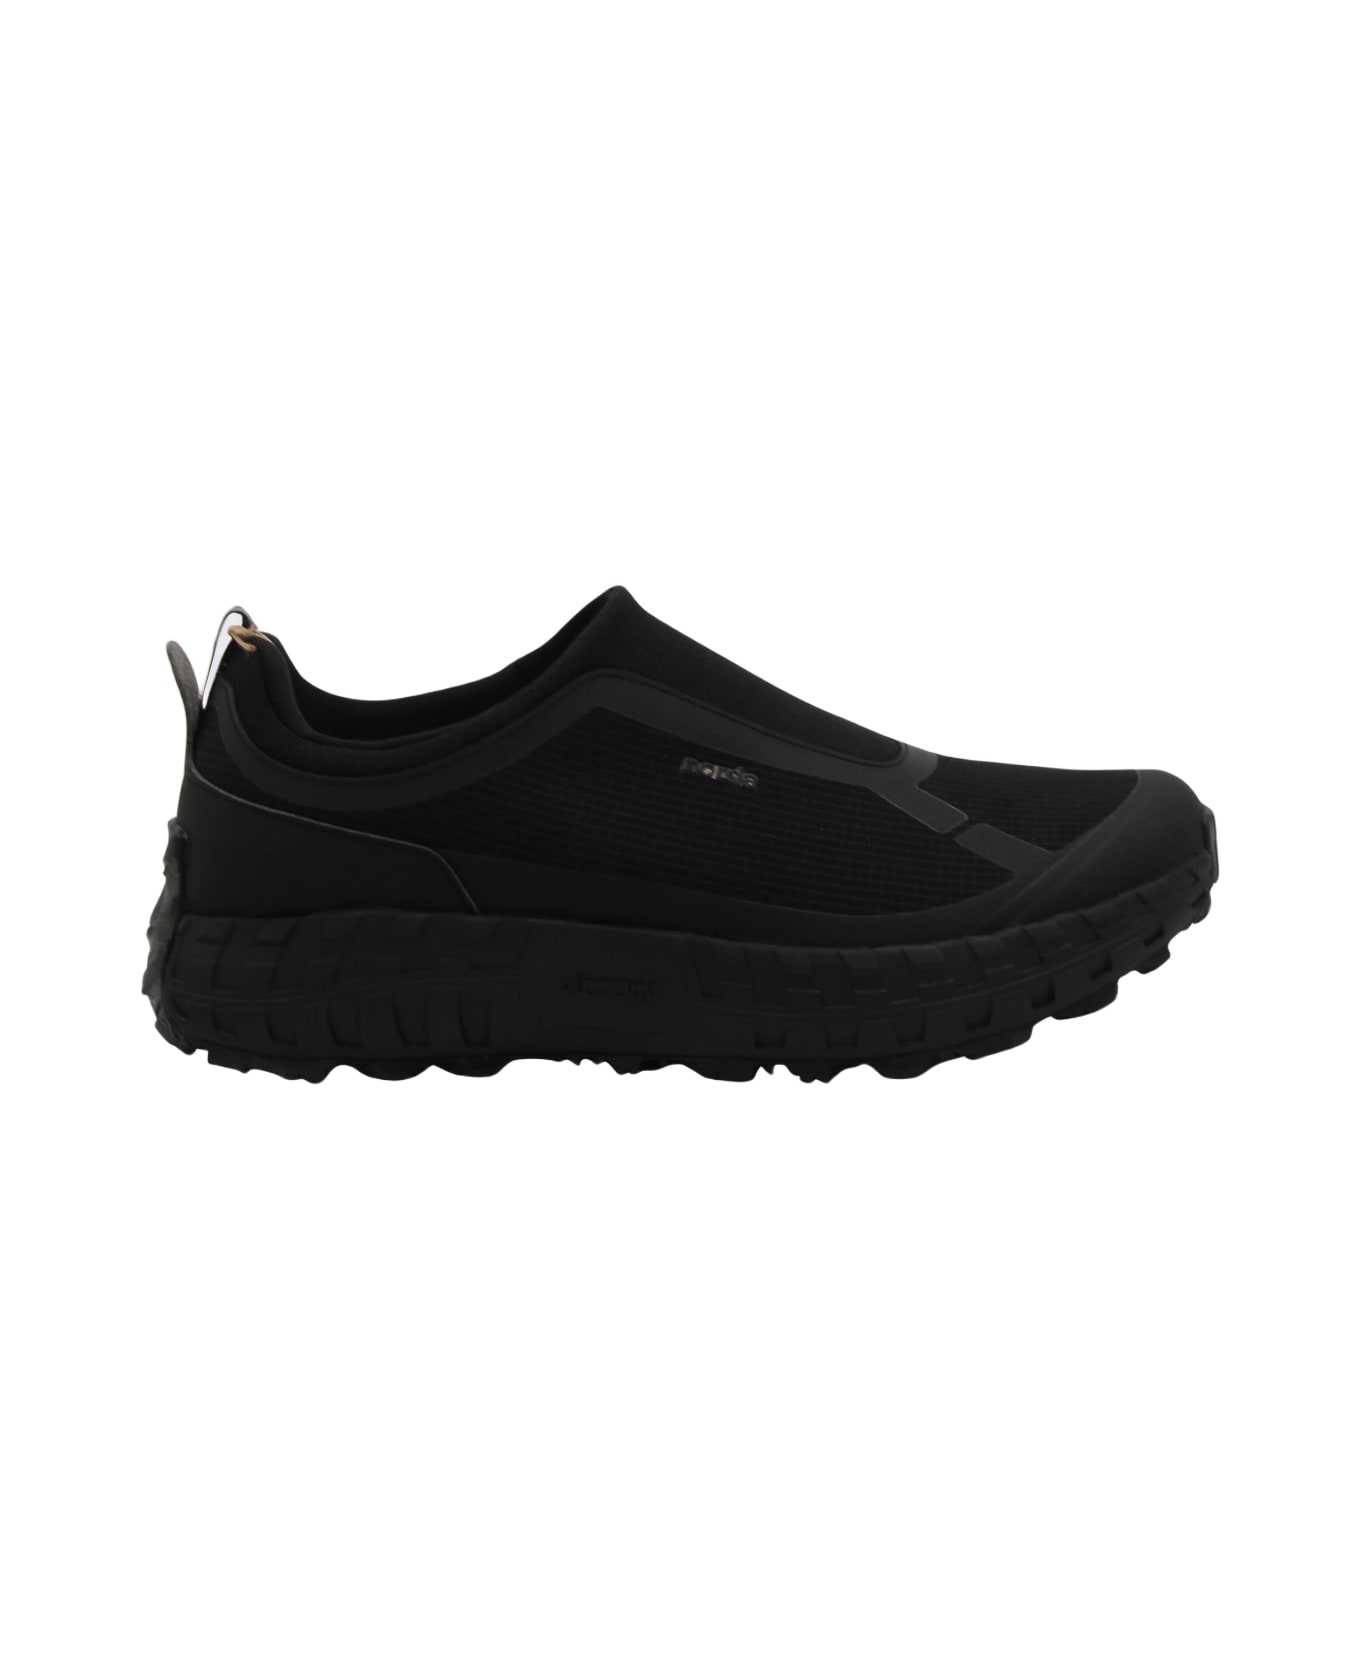 Norda Black The 003 M Pitch Sneakers - Black